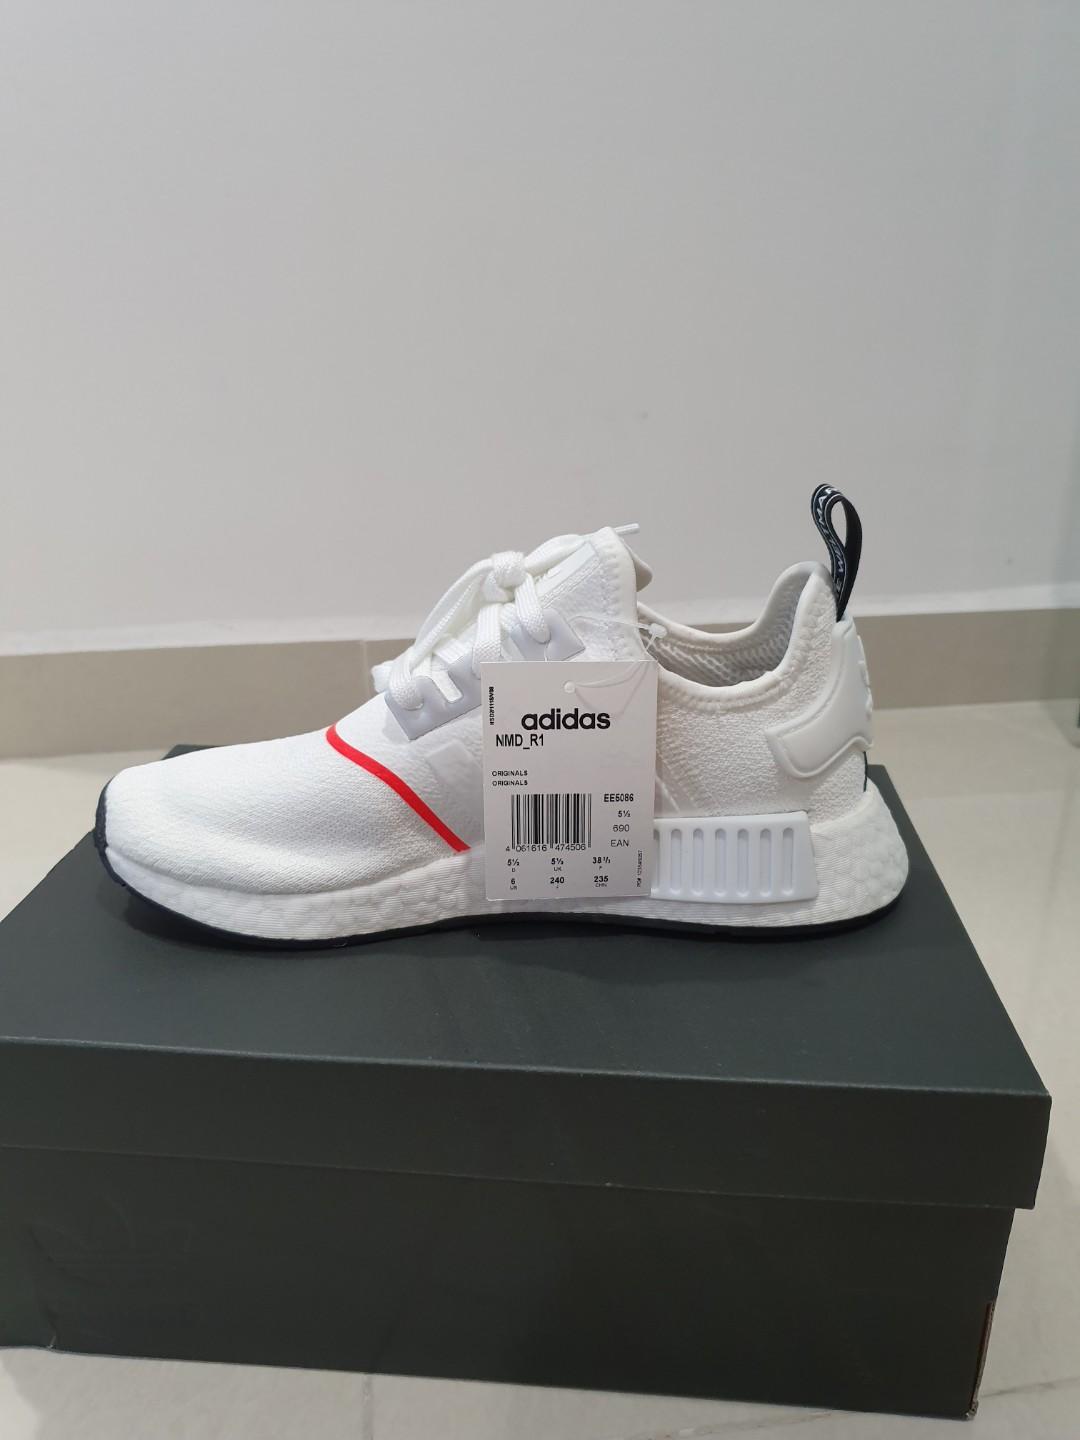 BN Adidas NMD R1 W White Solar Red size uk 5.5 us7 chn 235cm, Men's  Fashion, Footwear, Sneakers on Carousell